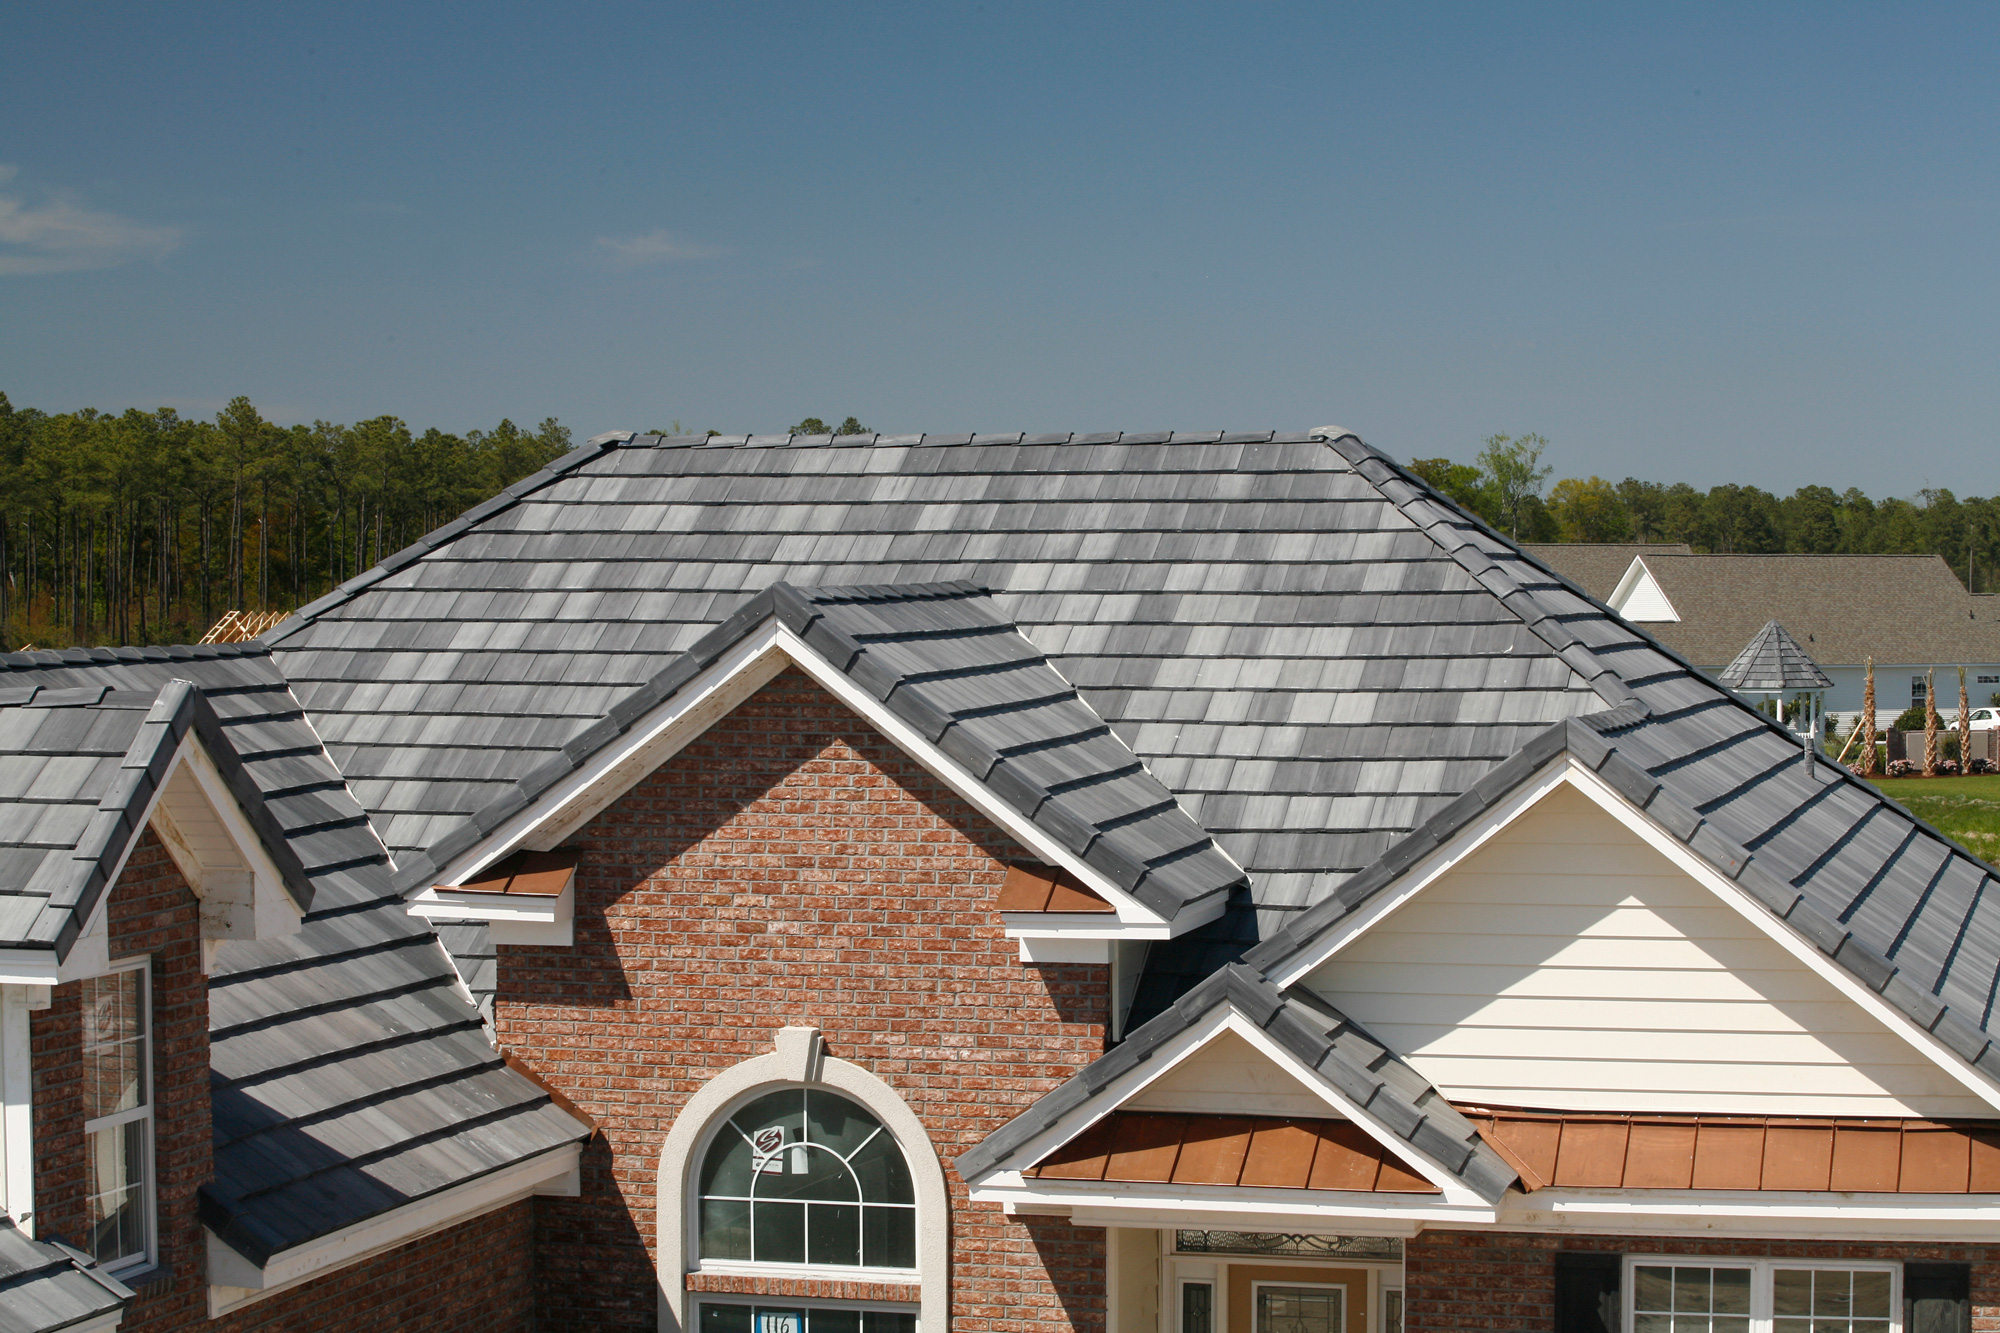 Concrete Tile Roofing Industry, Crown Roof Tiles